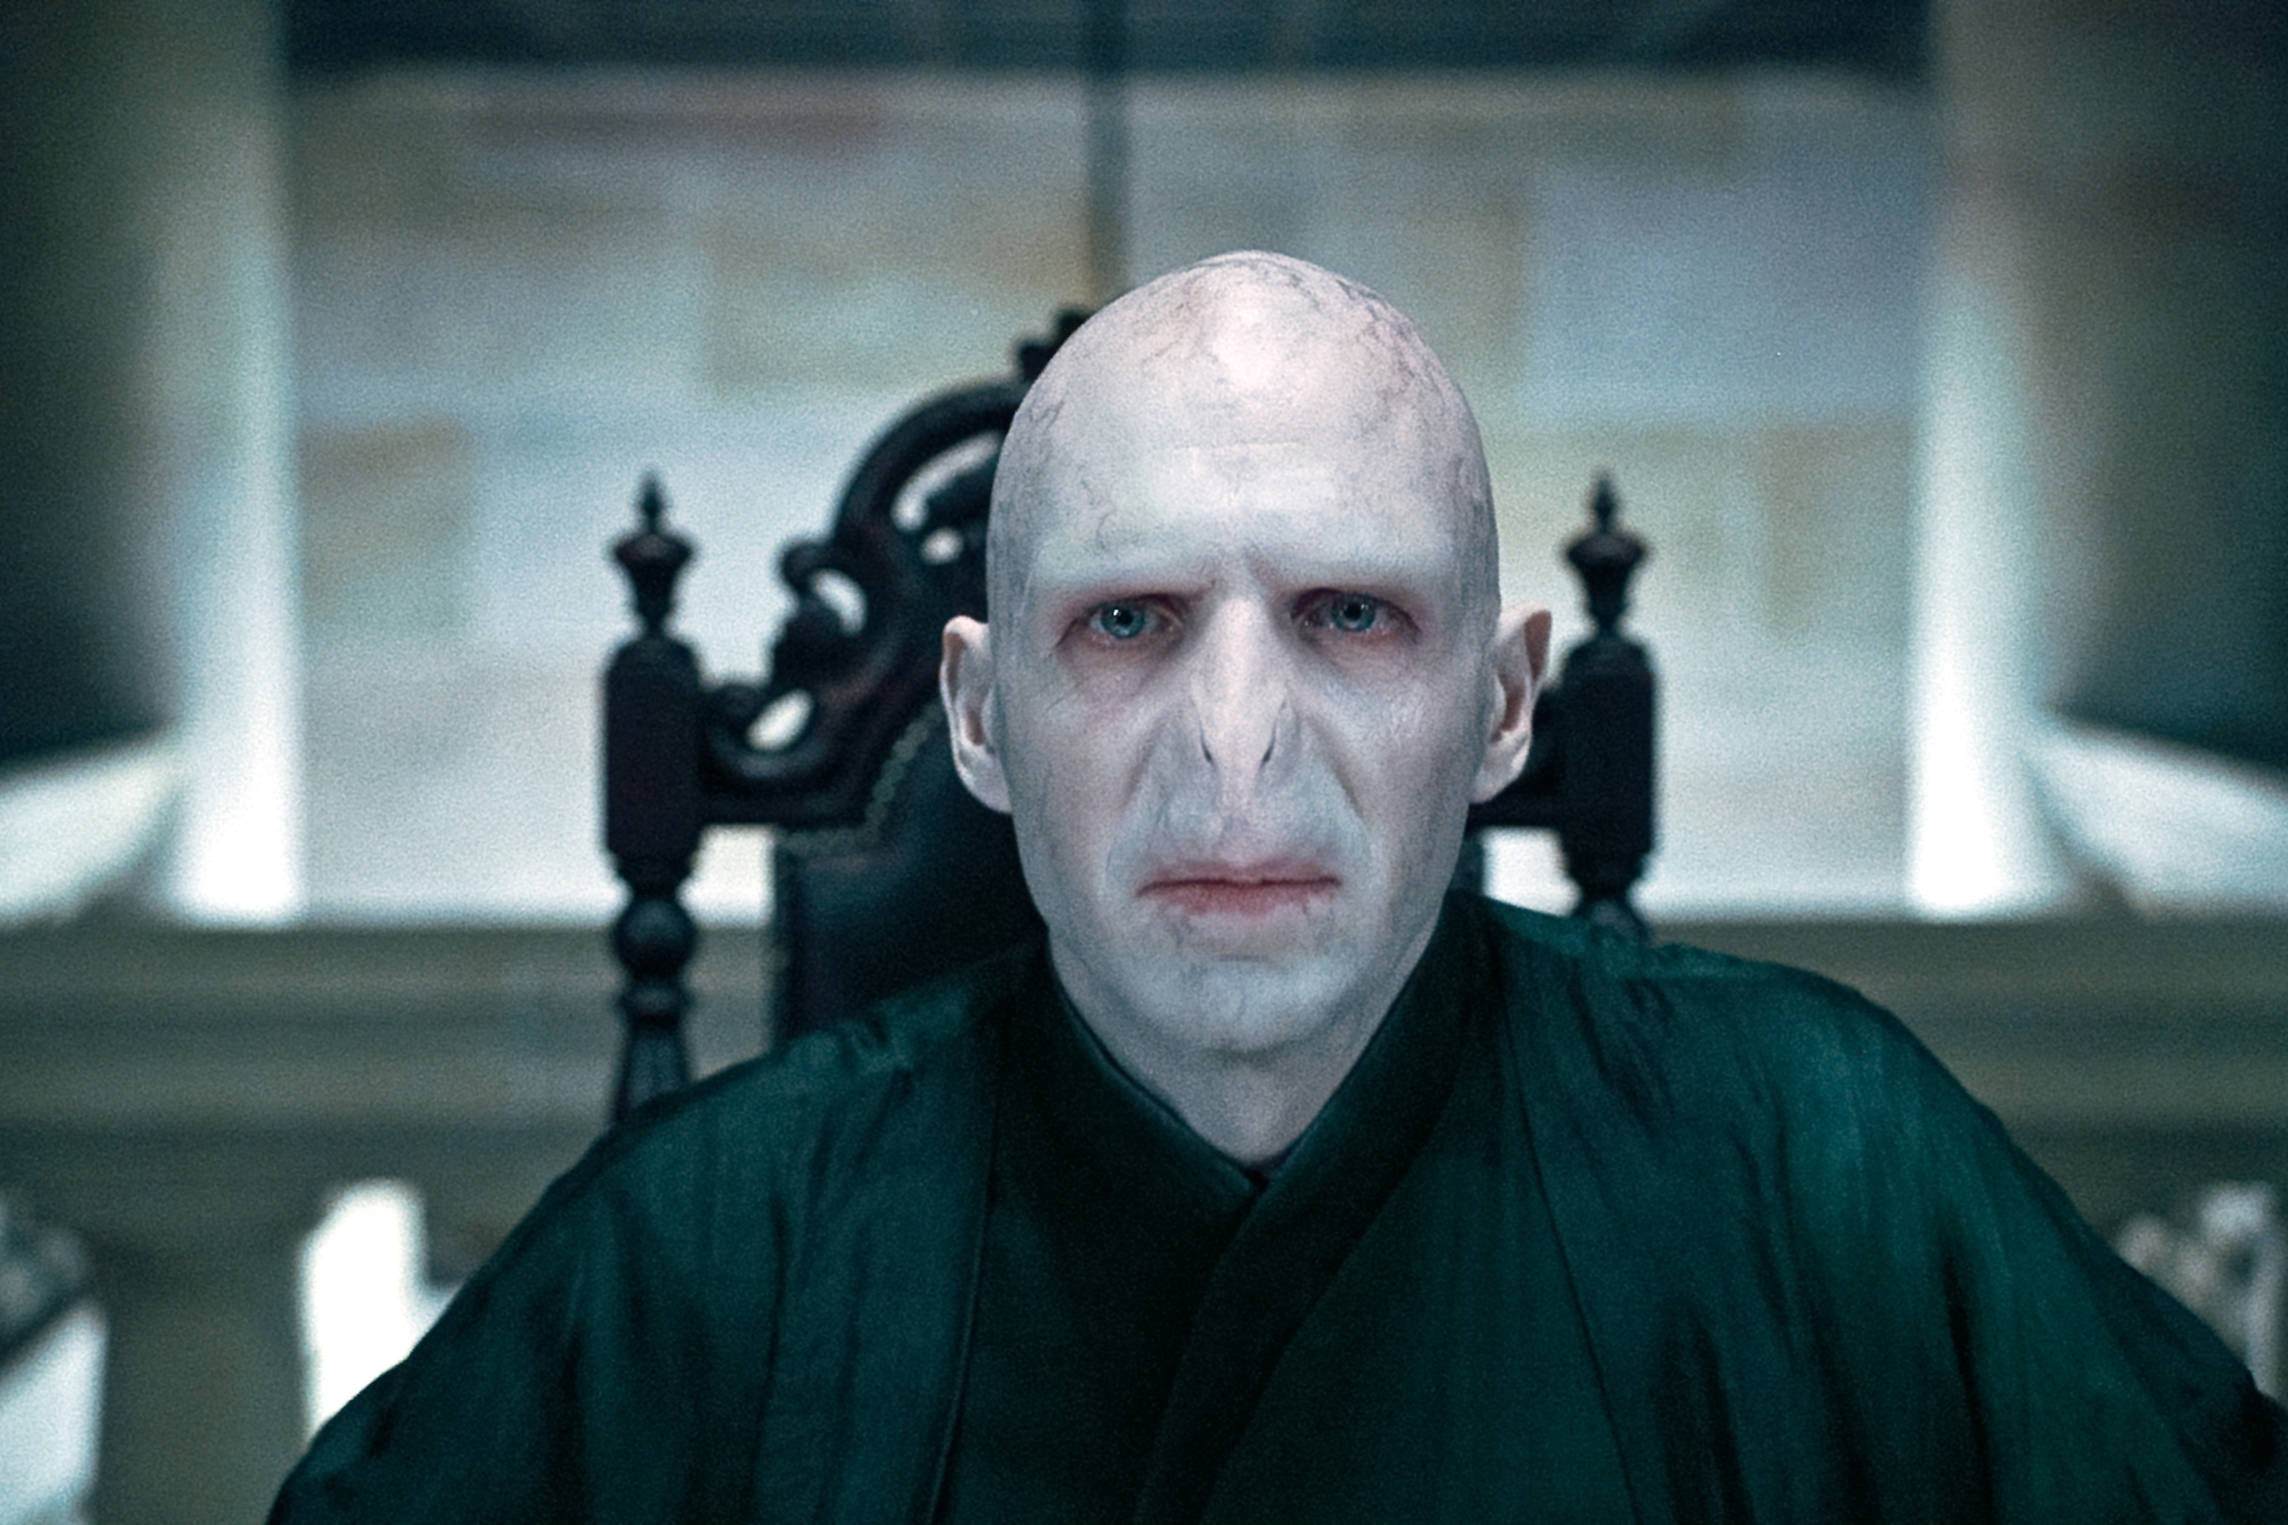 You Won’t Believe What Voldemort’s Feet Look Like!